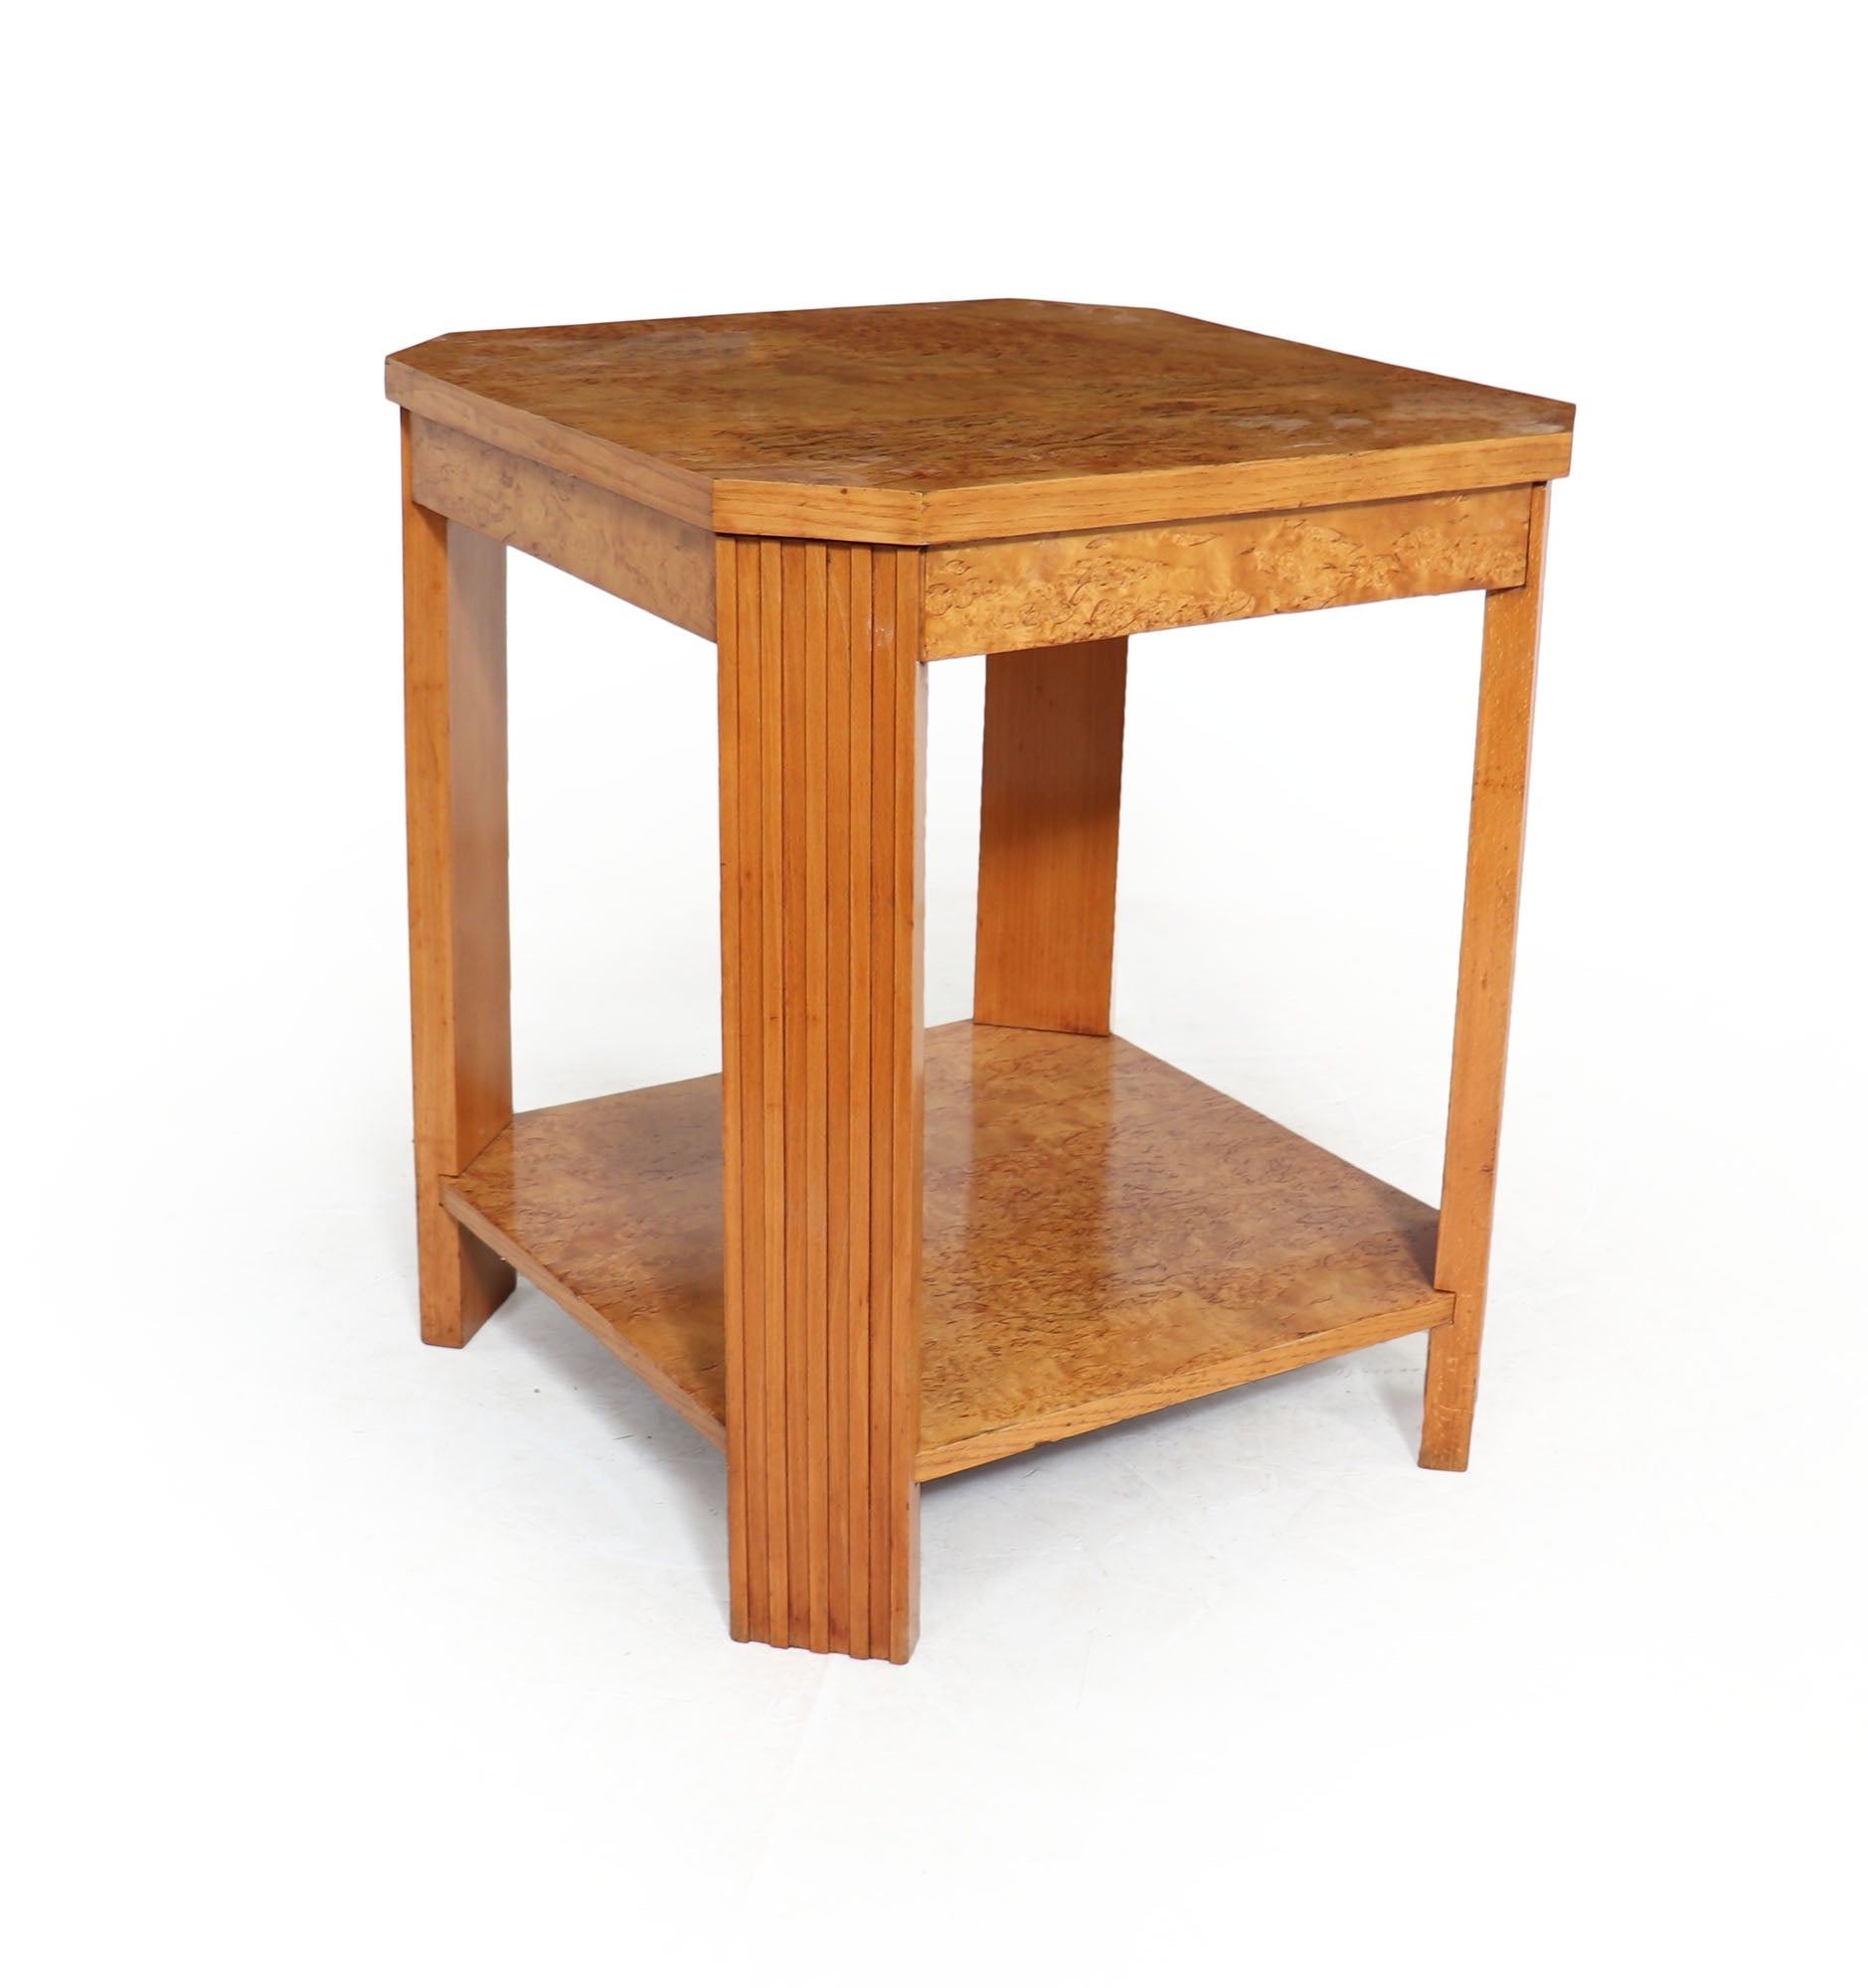 French Art Deco Table with Lift up Lid – The Furniture Rooms